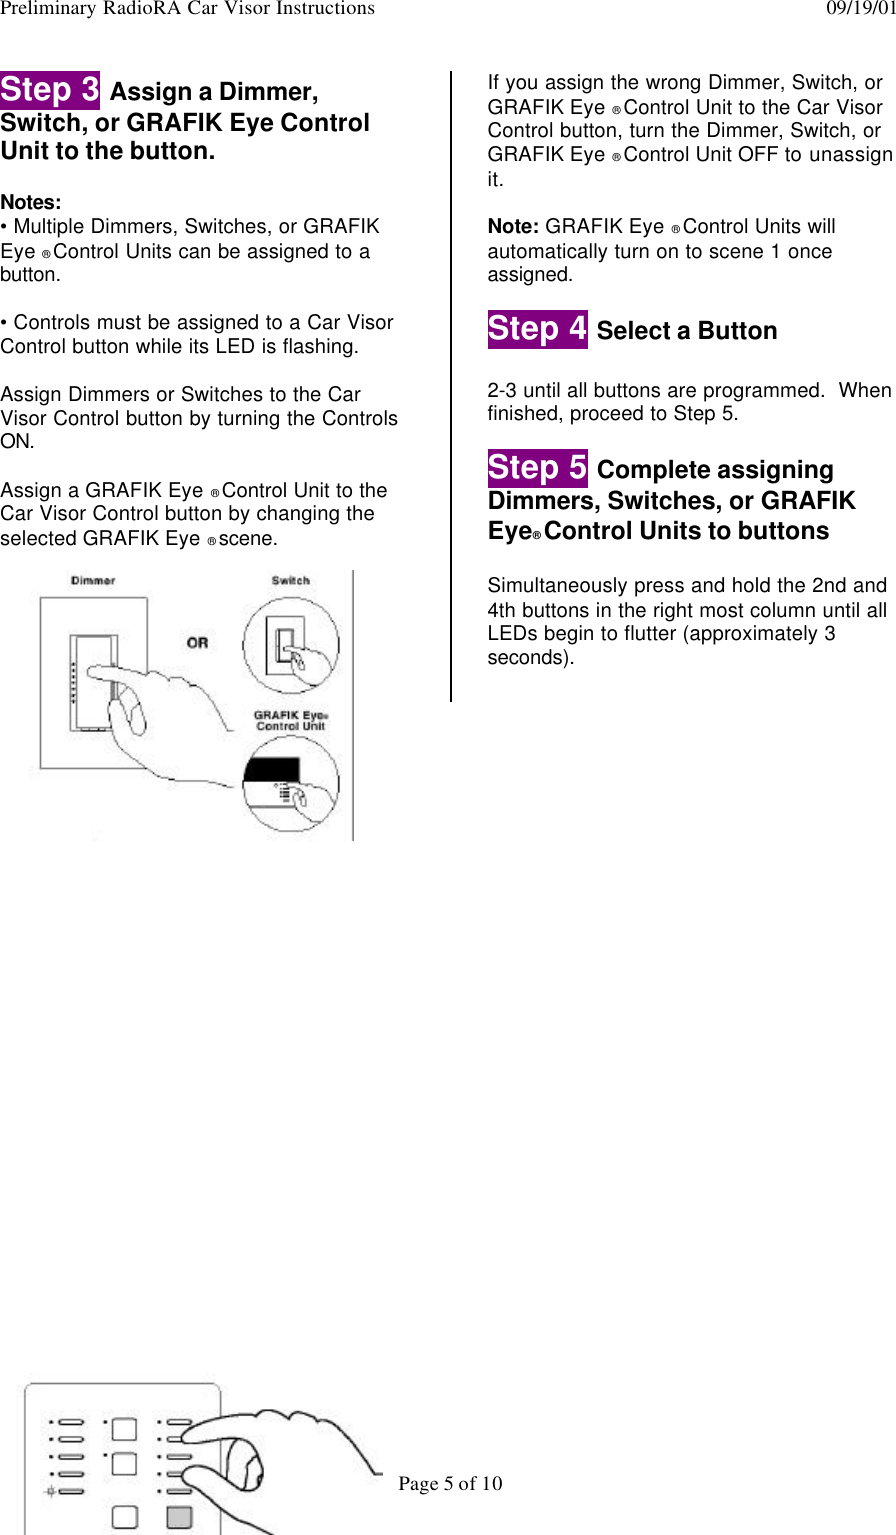 Preliminary RadioRA Car Visor Instructions  09/19/01Page 5 of 10Step 3 Assign a Dimmer,Switch, or GRAFIK Eye ControlUnit to the button.Notes:• Multiple Dimmers, Switches, or GRAFIKEye ® Control Units can be assigned to abutton.• Controls must be assigned to a Car VisorControl button while its LED is flashing.Assign Dimmers or Switches to the CarVisor Control button by turning the ControlsON.Assign a GRAFIK Eye ® Control Unit to theCar Visor Control button by changing theselected GRAFIK Eye ® scene.If you assign the wrong Dimmer, Switch, orGRAFIK Eye ® Control Unit to the Car VisorControl button, turn the Dimmer, Switch, orGRAFIK Eye ® Control Unit OFF to unassignit.Note: GRAFIK Eye ® Control Units willautomatically turn on to scene 1 onceassigned.Step 4 Select a Button2-3 until all buttons are programmed.  Whenfinished, proceed to Step 5.Step 5 Complete assigningDimmers, Switches, or GRAFIKEye® Control Units to buttonsSimultaneously press and hold the 2nd and4th buttons in the right most column until allLEDs begin to flutter (approximately 3seconds).